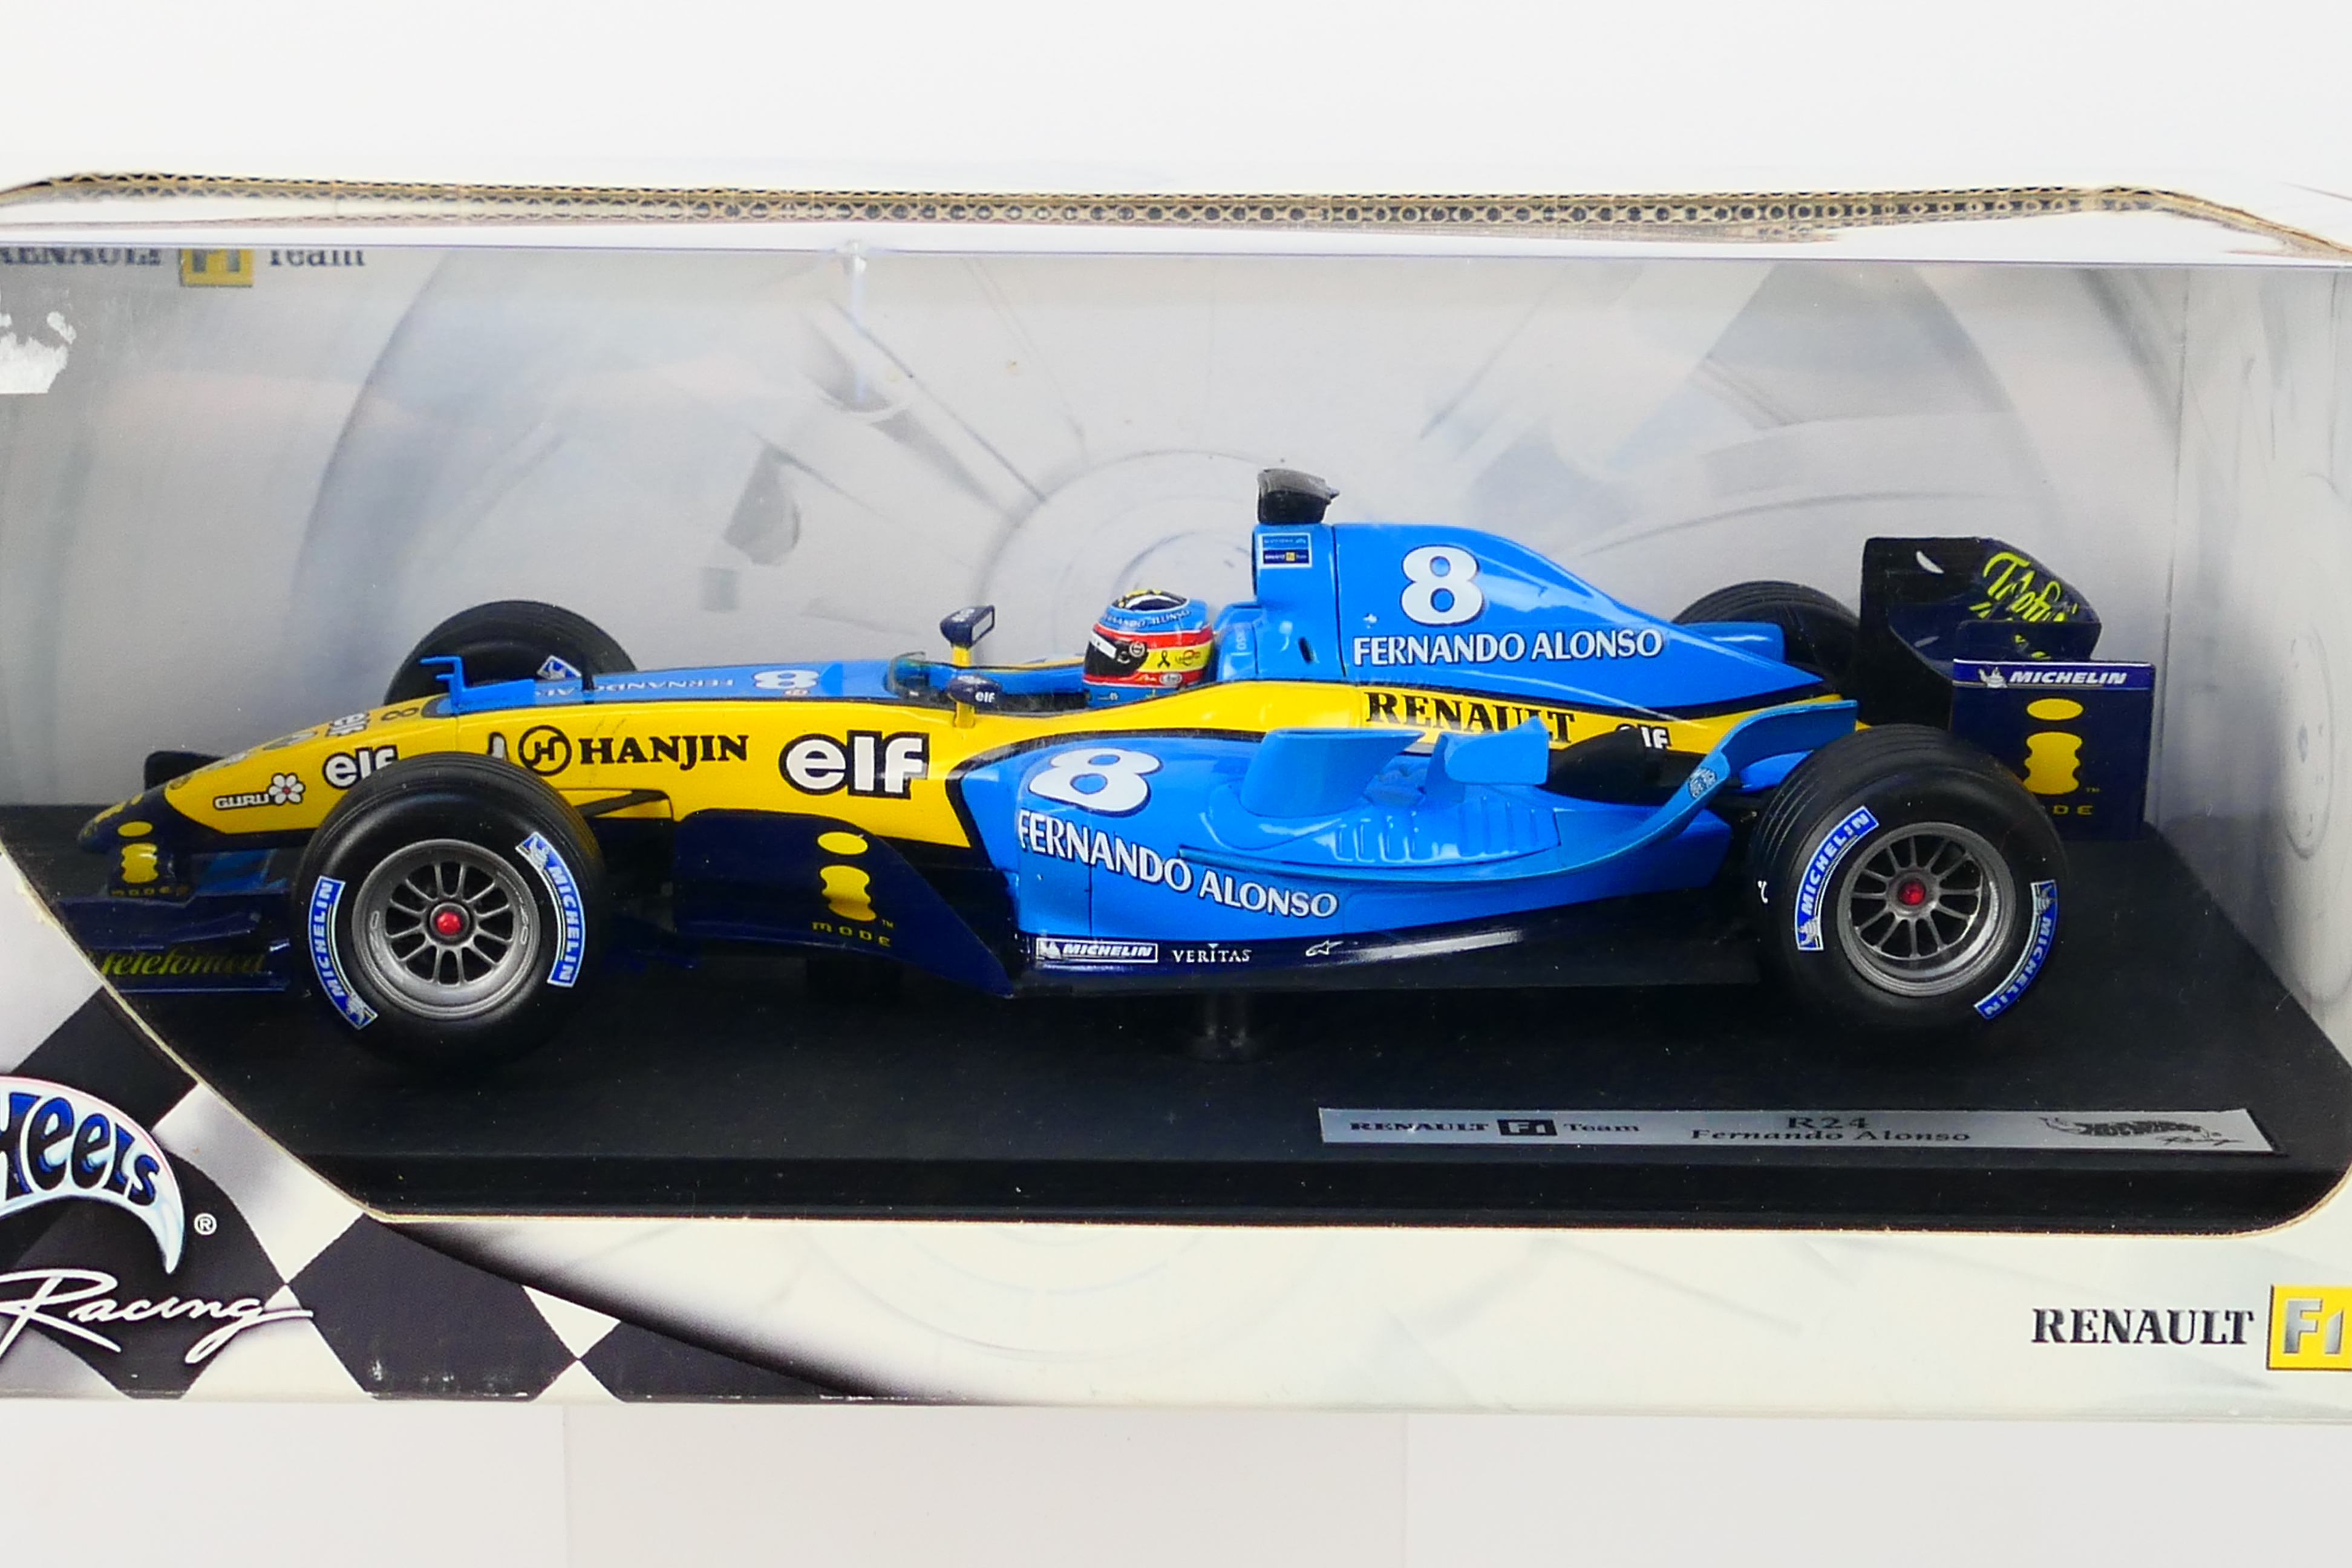 Hot Wheels - A boxed 1:18 scale Renault R24 Fernando Alonso car which appears Mint in a Good box - Image 2 of 3